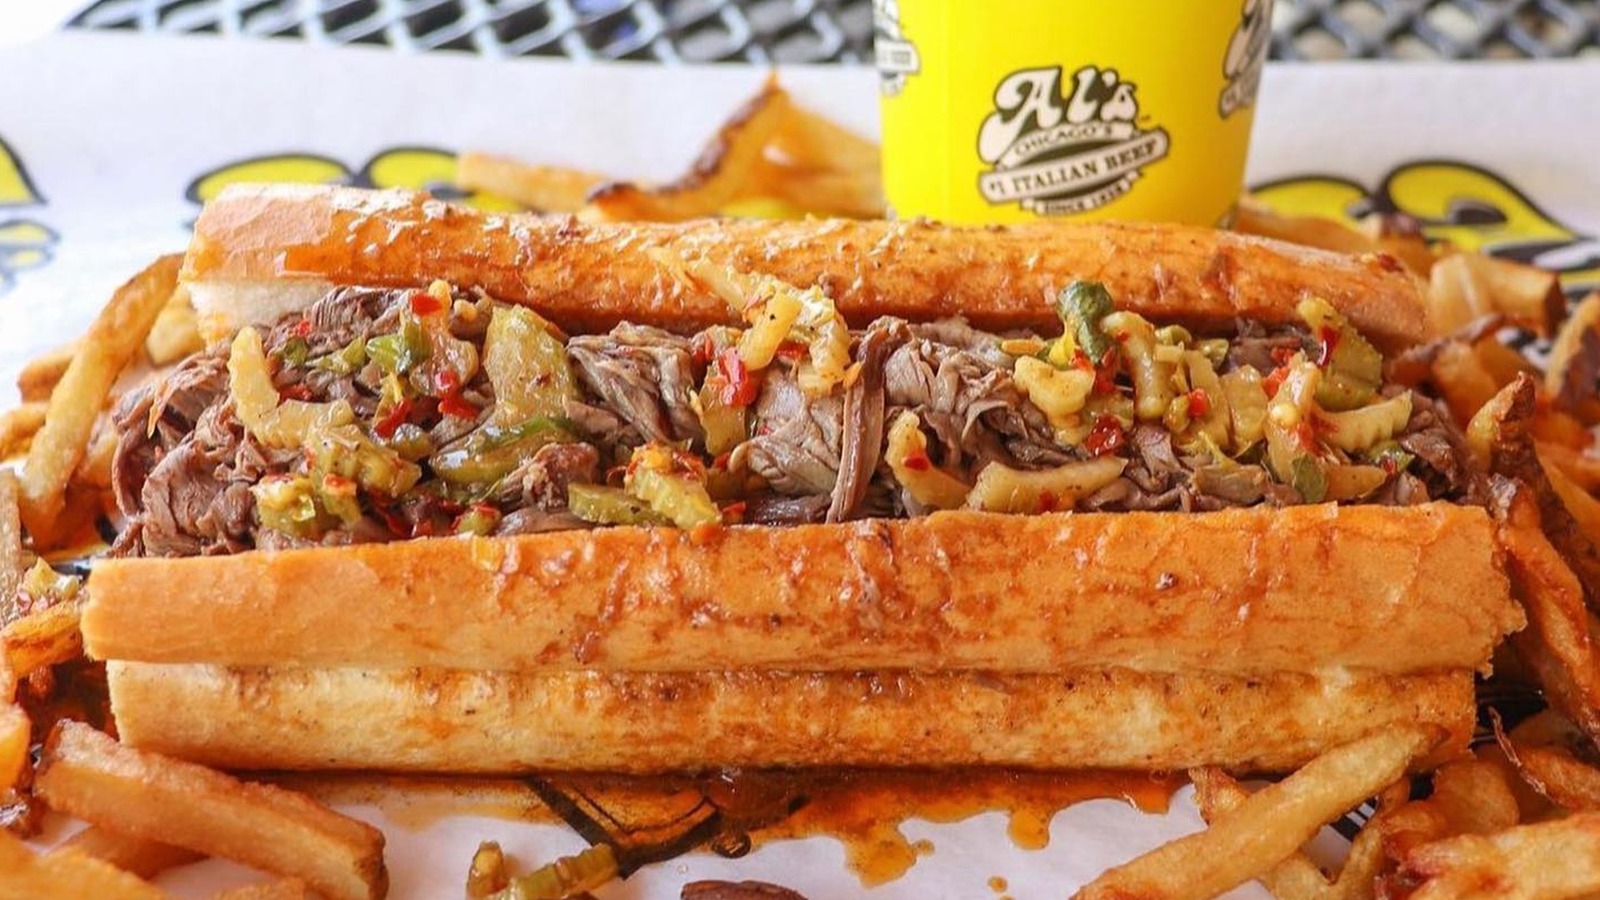 The Best Italian Beef Sandwiches In Chicago That Bring The Bear To